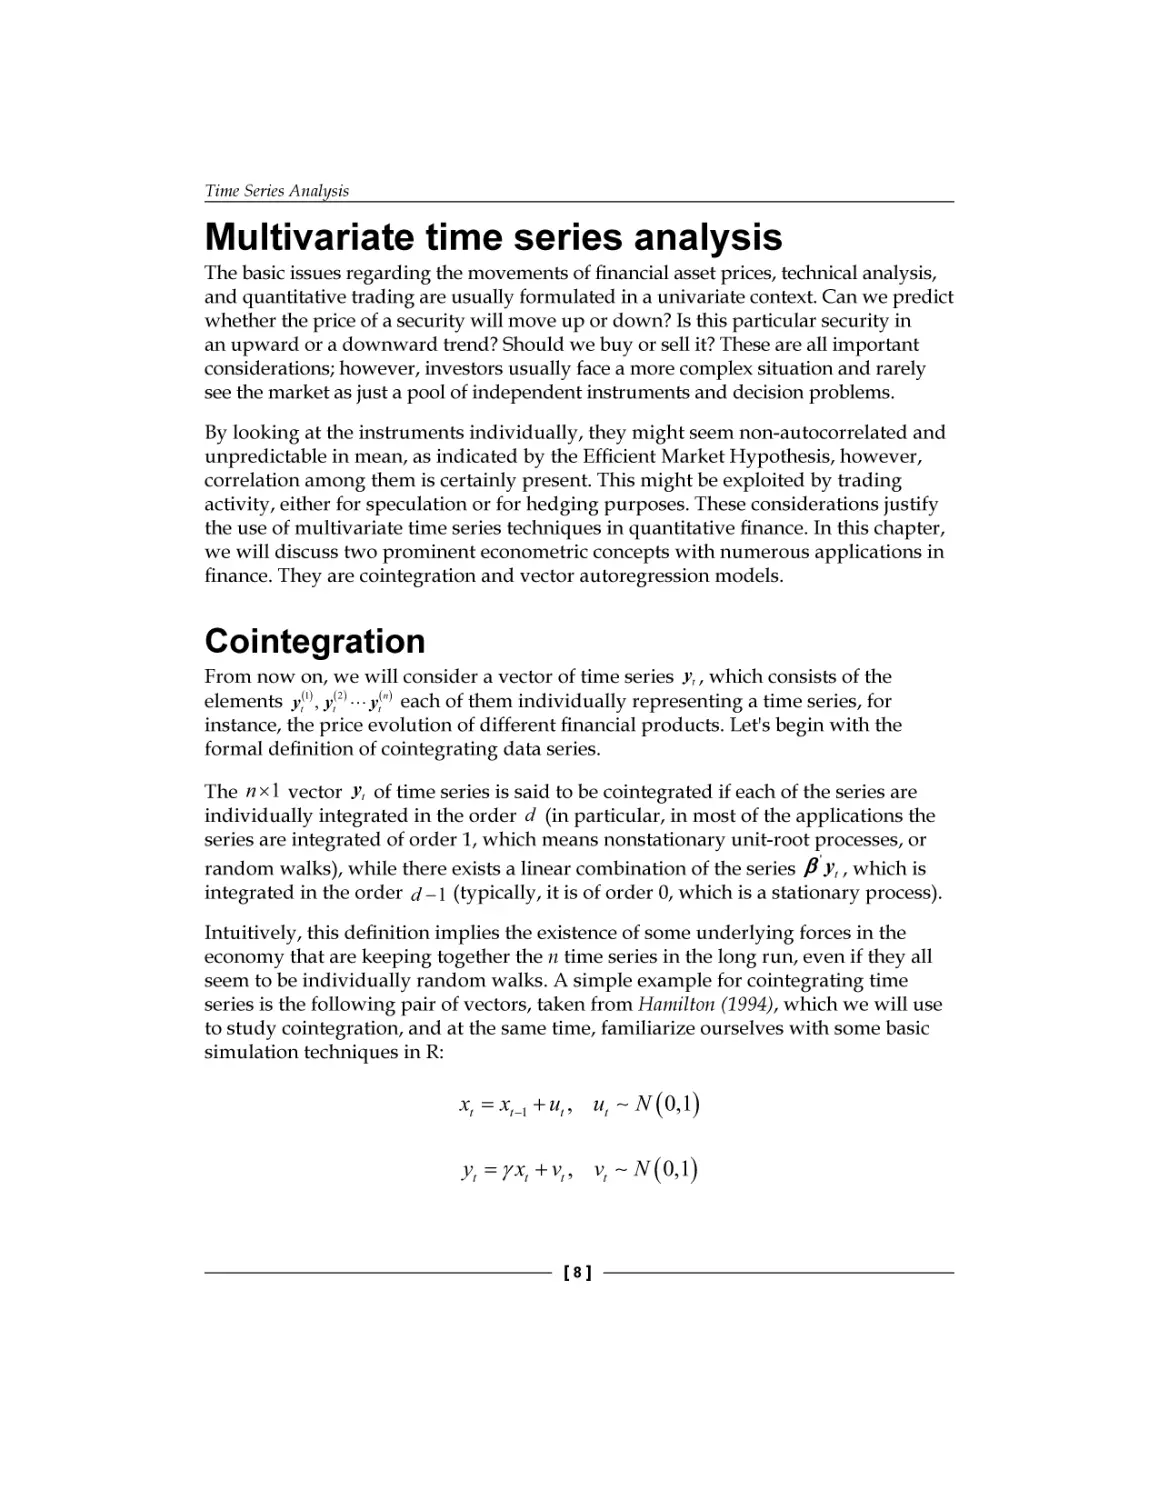 Multivariate time series analysis
Cointegration